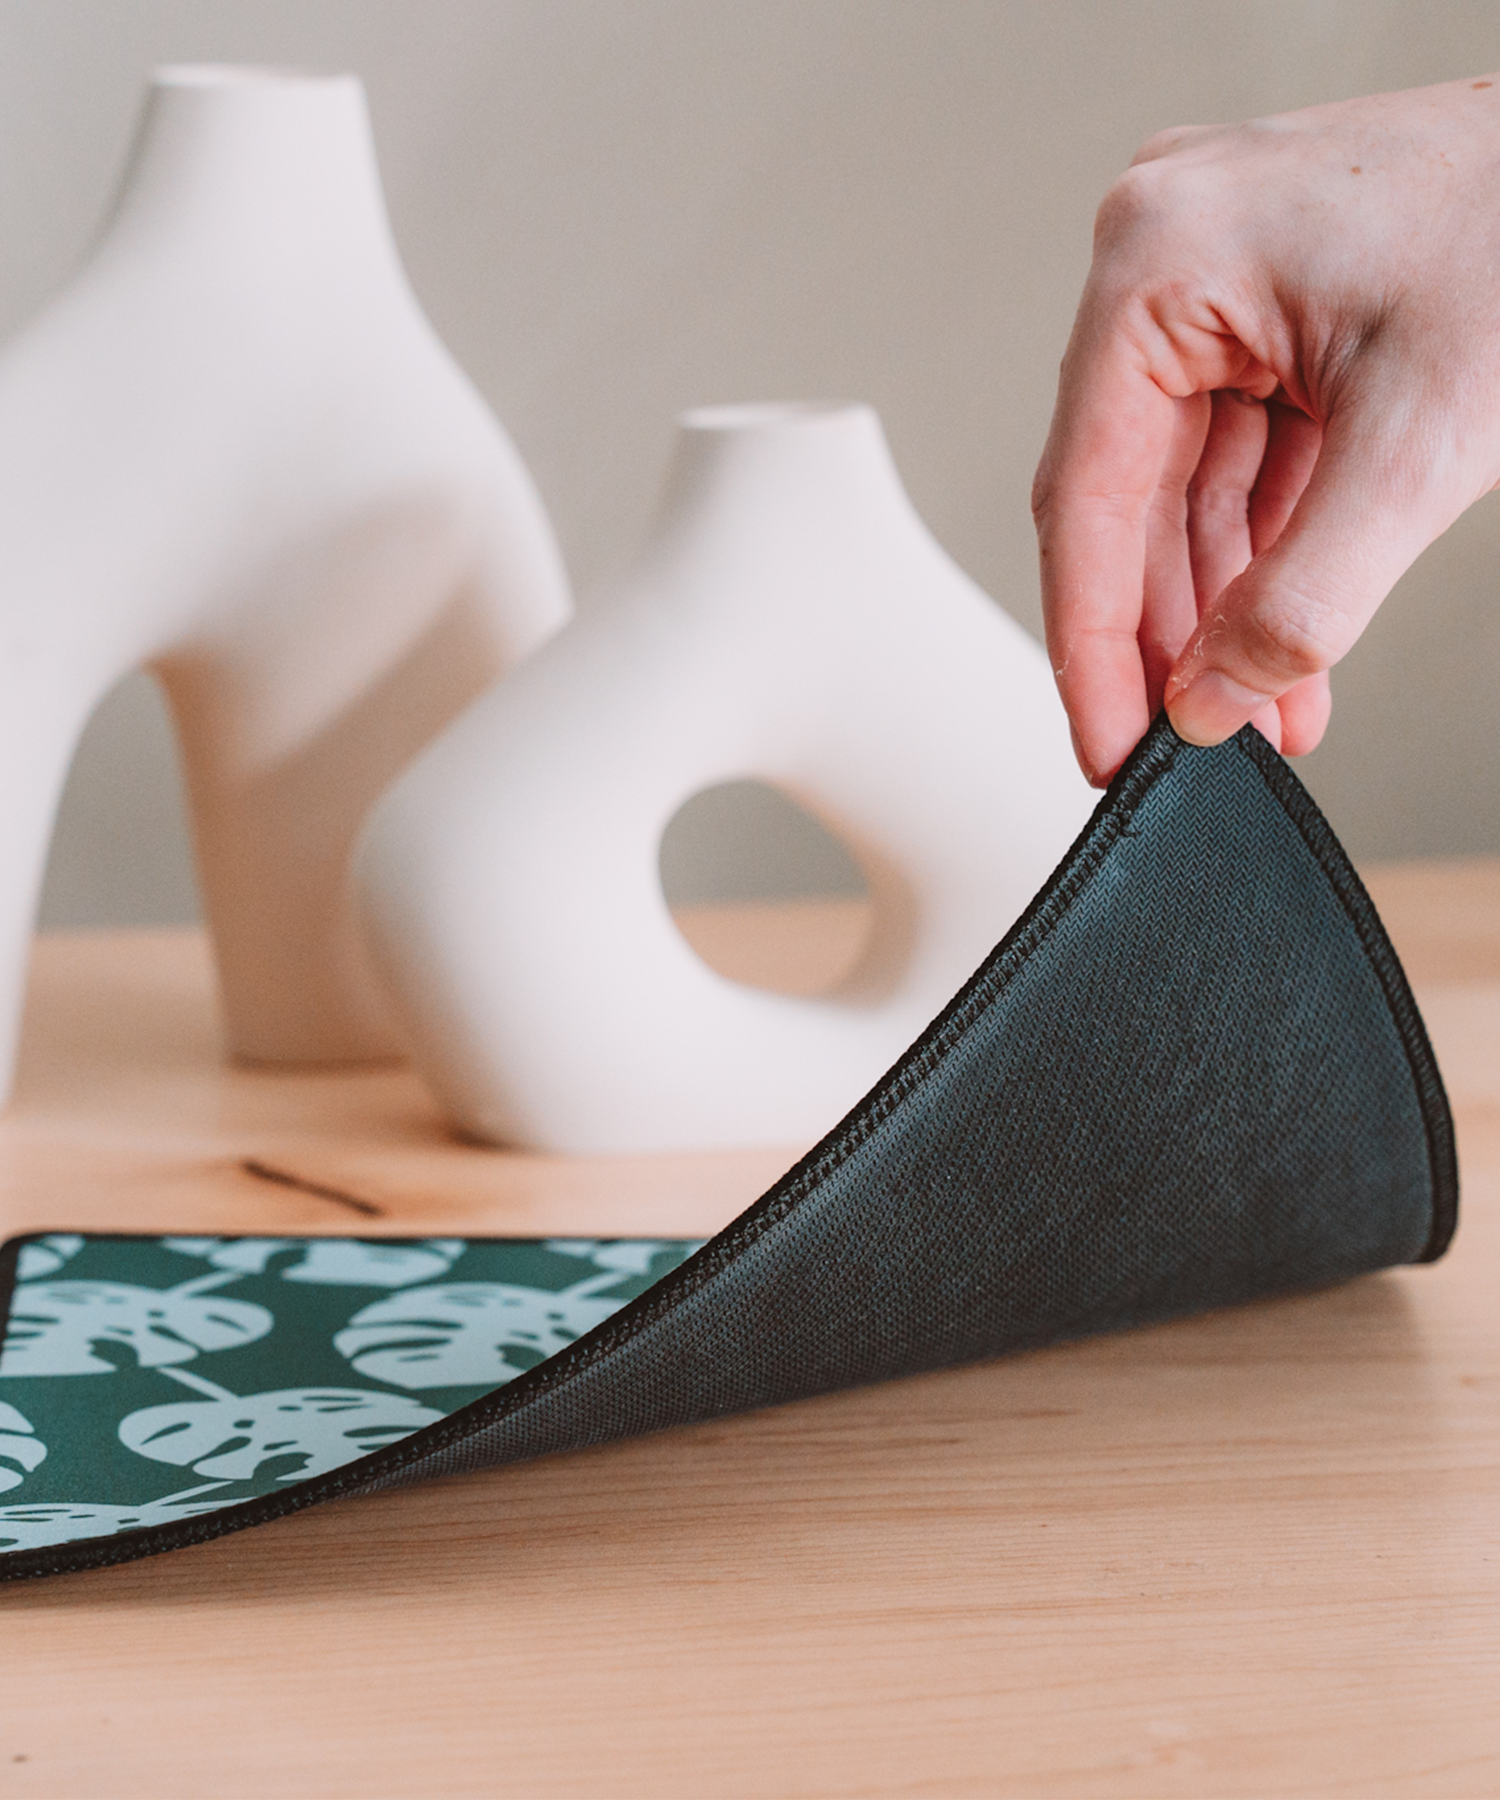 A hand is lifting a corner of the Monstera mousepad to reveal the black anti-slip rubber backing. In the background are two asymmetrical vases.